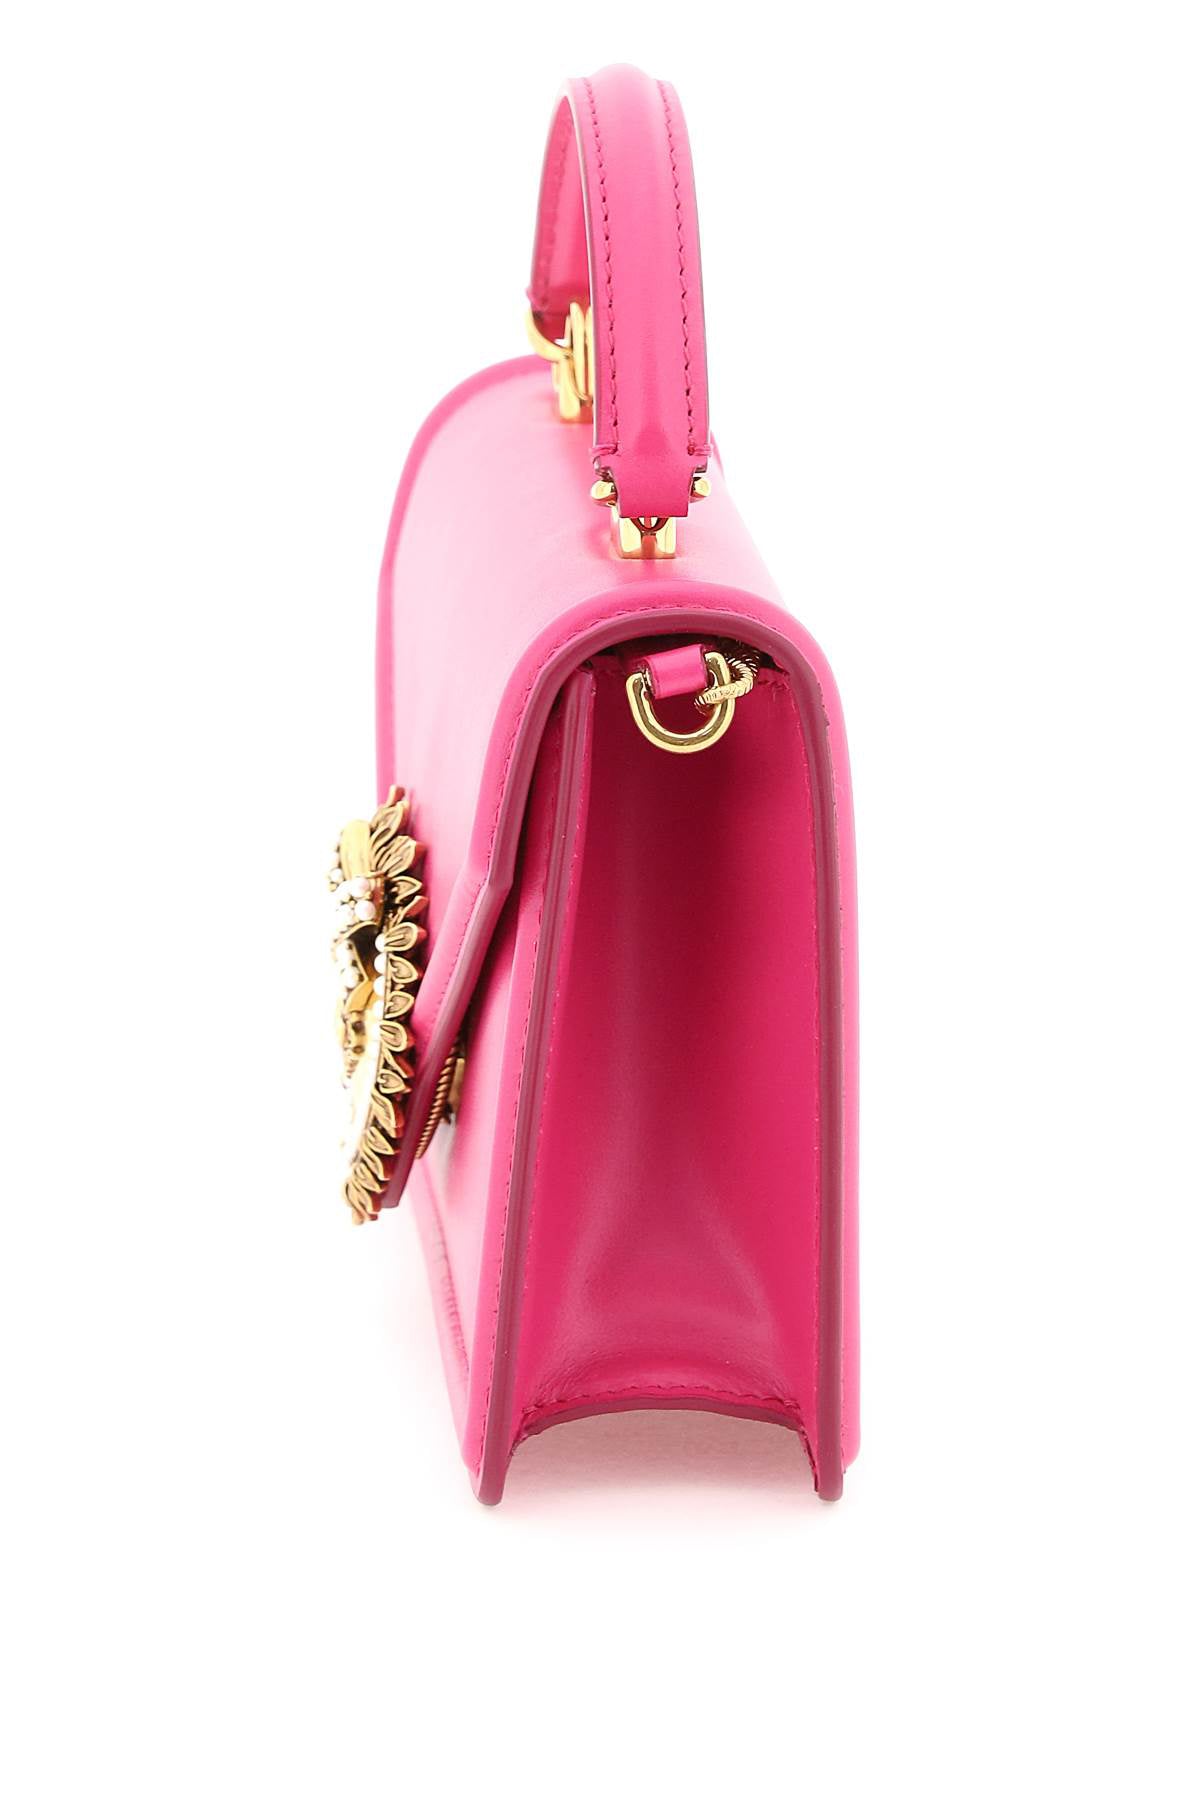 DOLCE & GABBANA Small Devotion Pink Leather Handbag with Pearl-Embellished Heart and Chain Strap